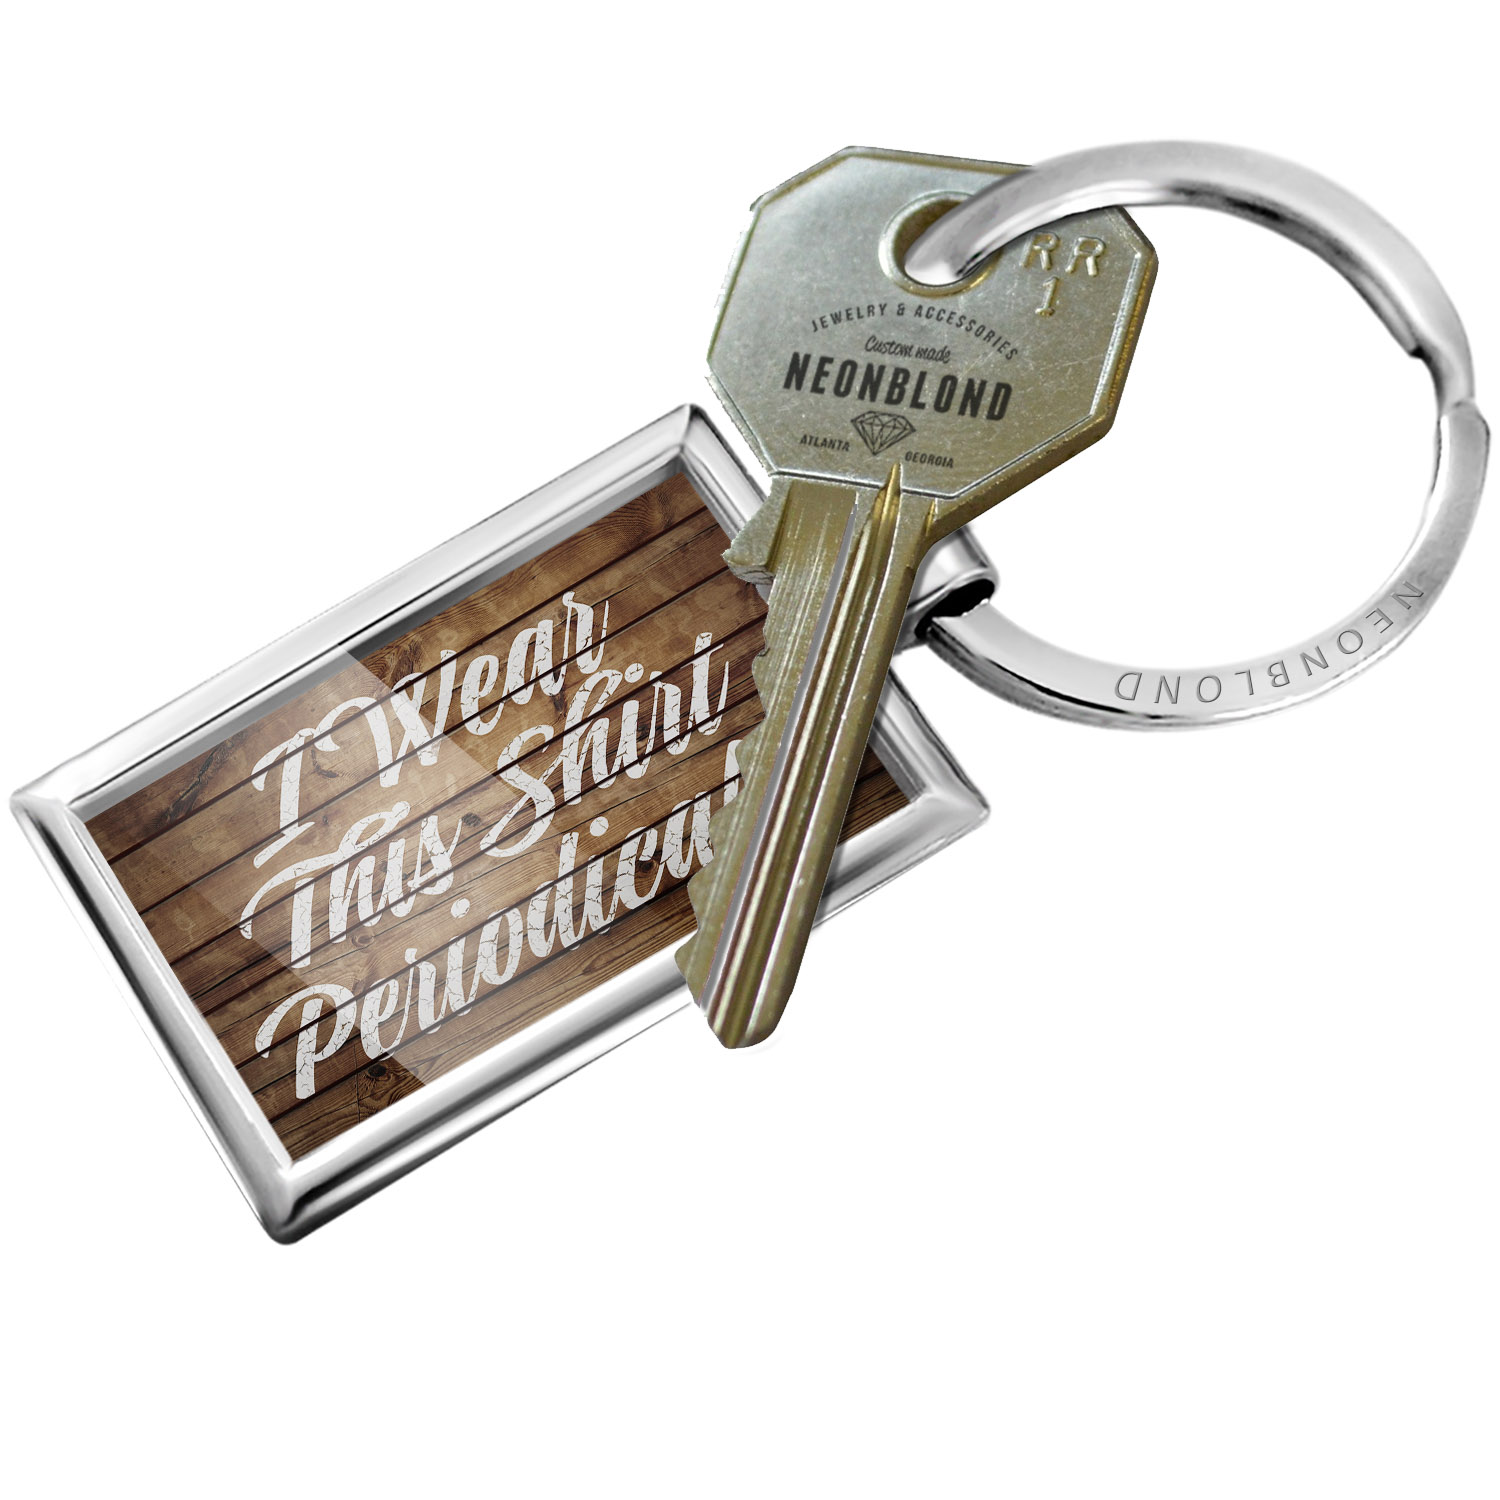 NEONBLOND Keychain Painted Wood I Wear This Shirt Periodically - image 1 of 1